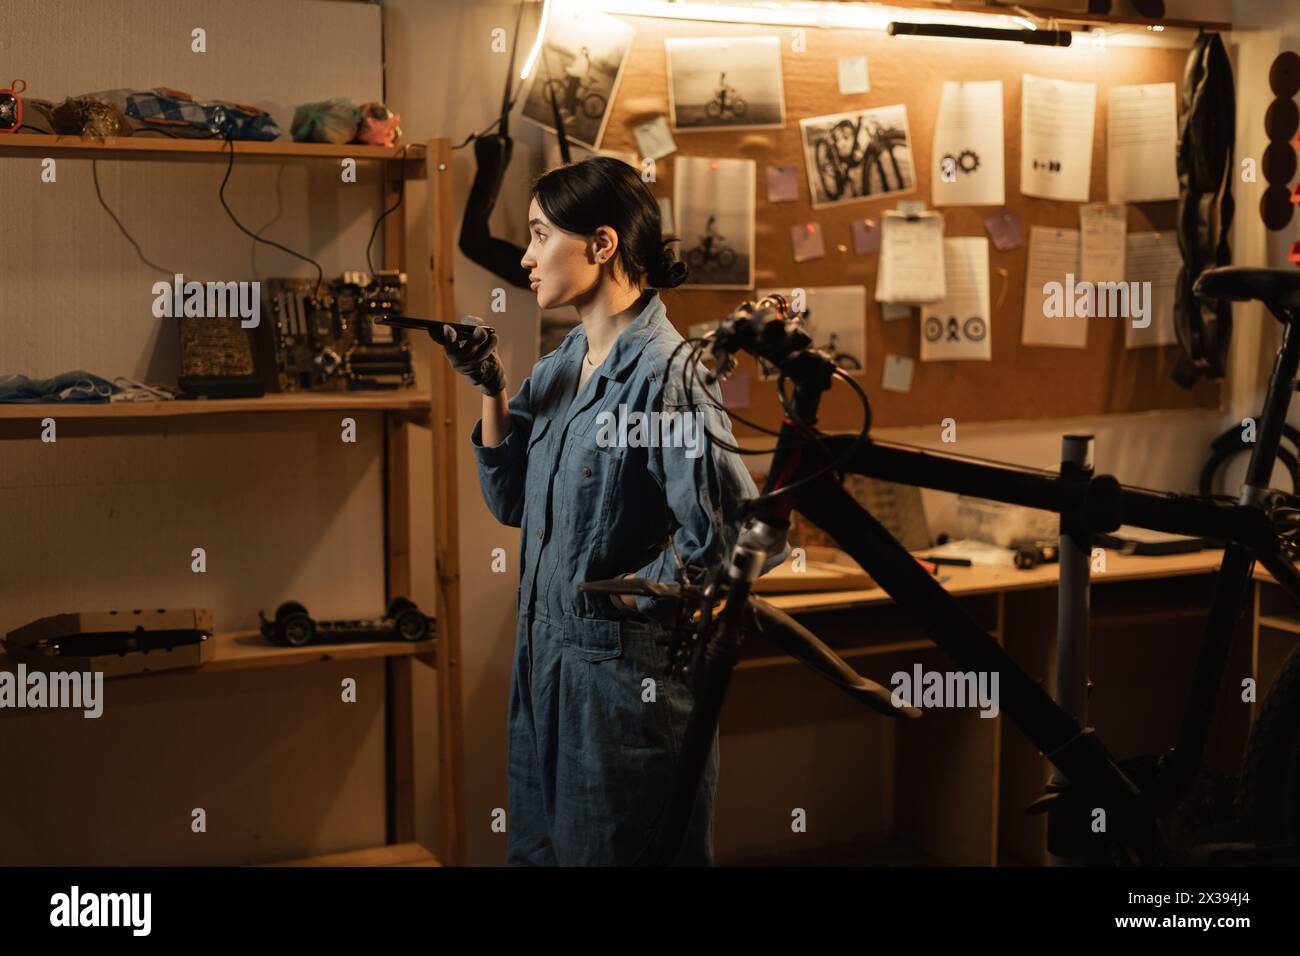 Pretty woman repairing bike in garage, holding in hand smartphone talking with digital assistant uses voice messaging, voice recognition Stock Photo